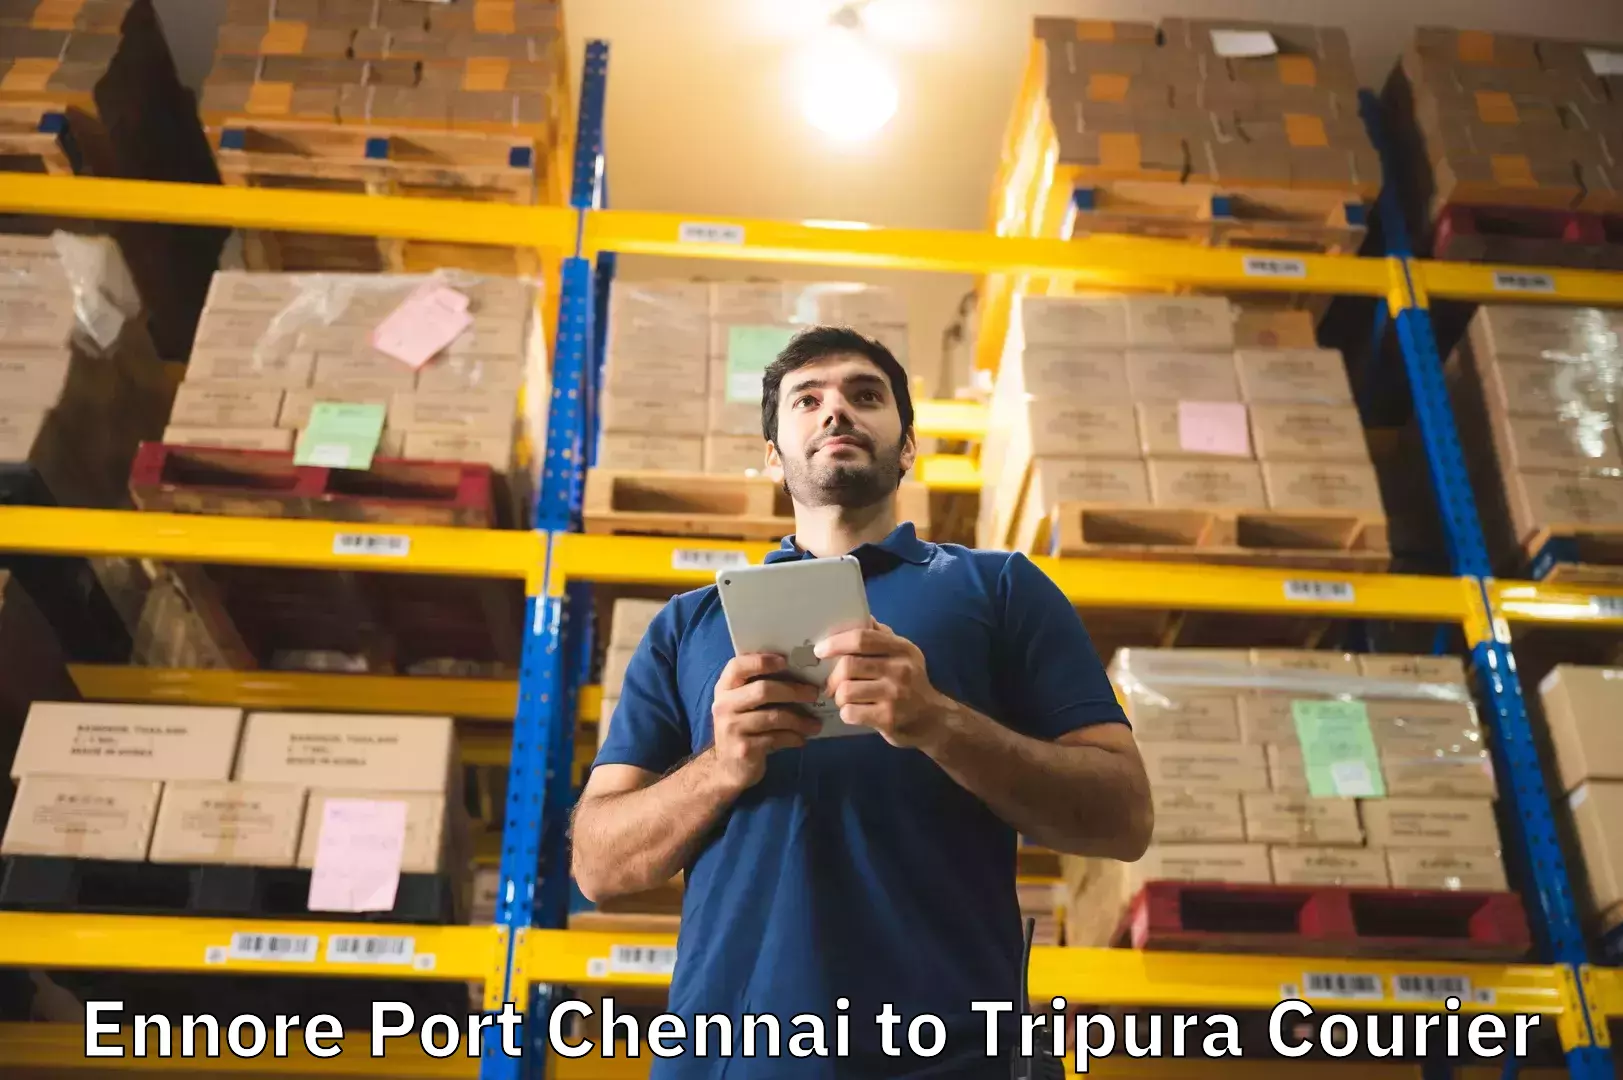 Luggage delivery system Ennore Port Chennai to Tripura